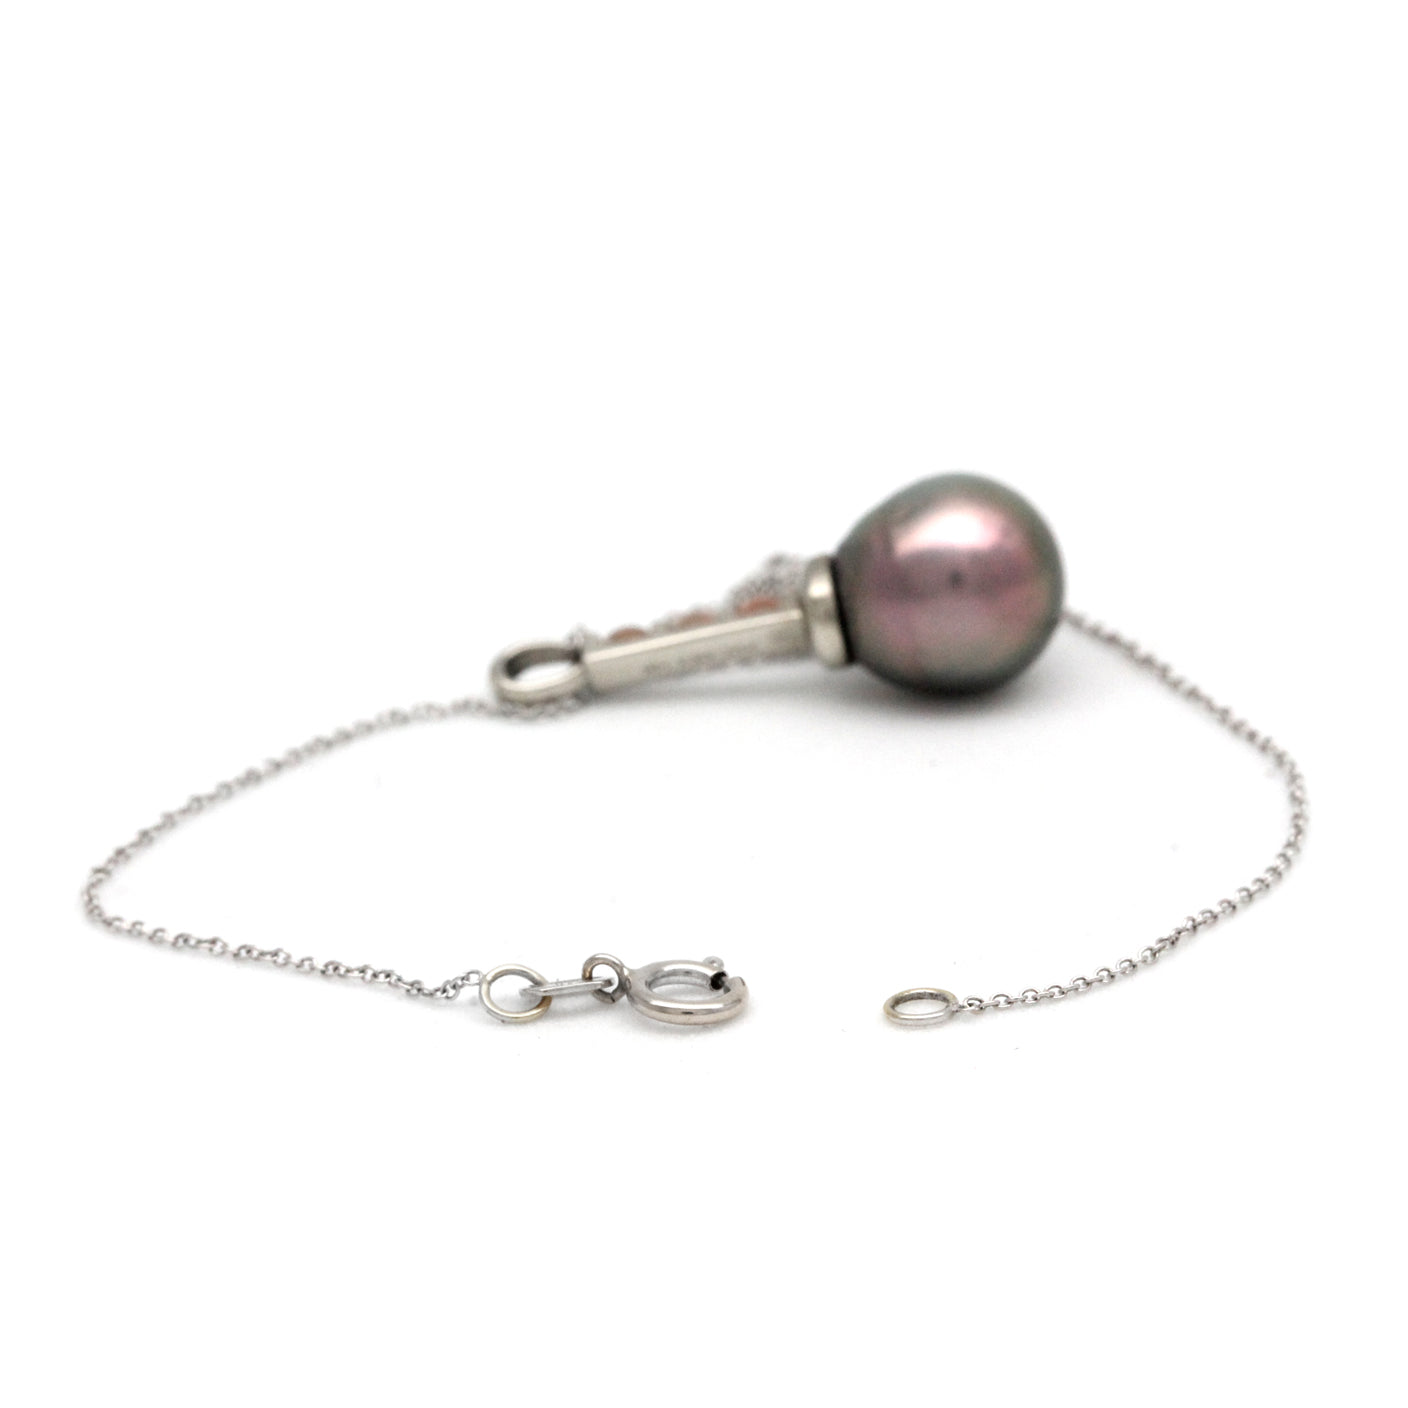 Gem Grade Cortez Pearl 14K White Gold Pendant and Chain with Heliolites